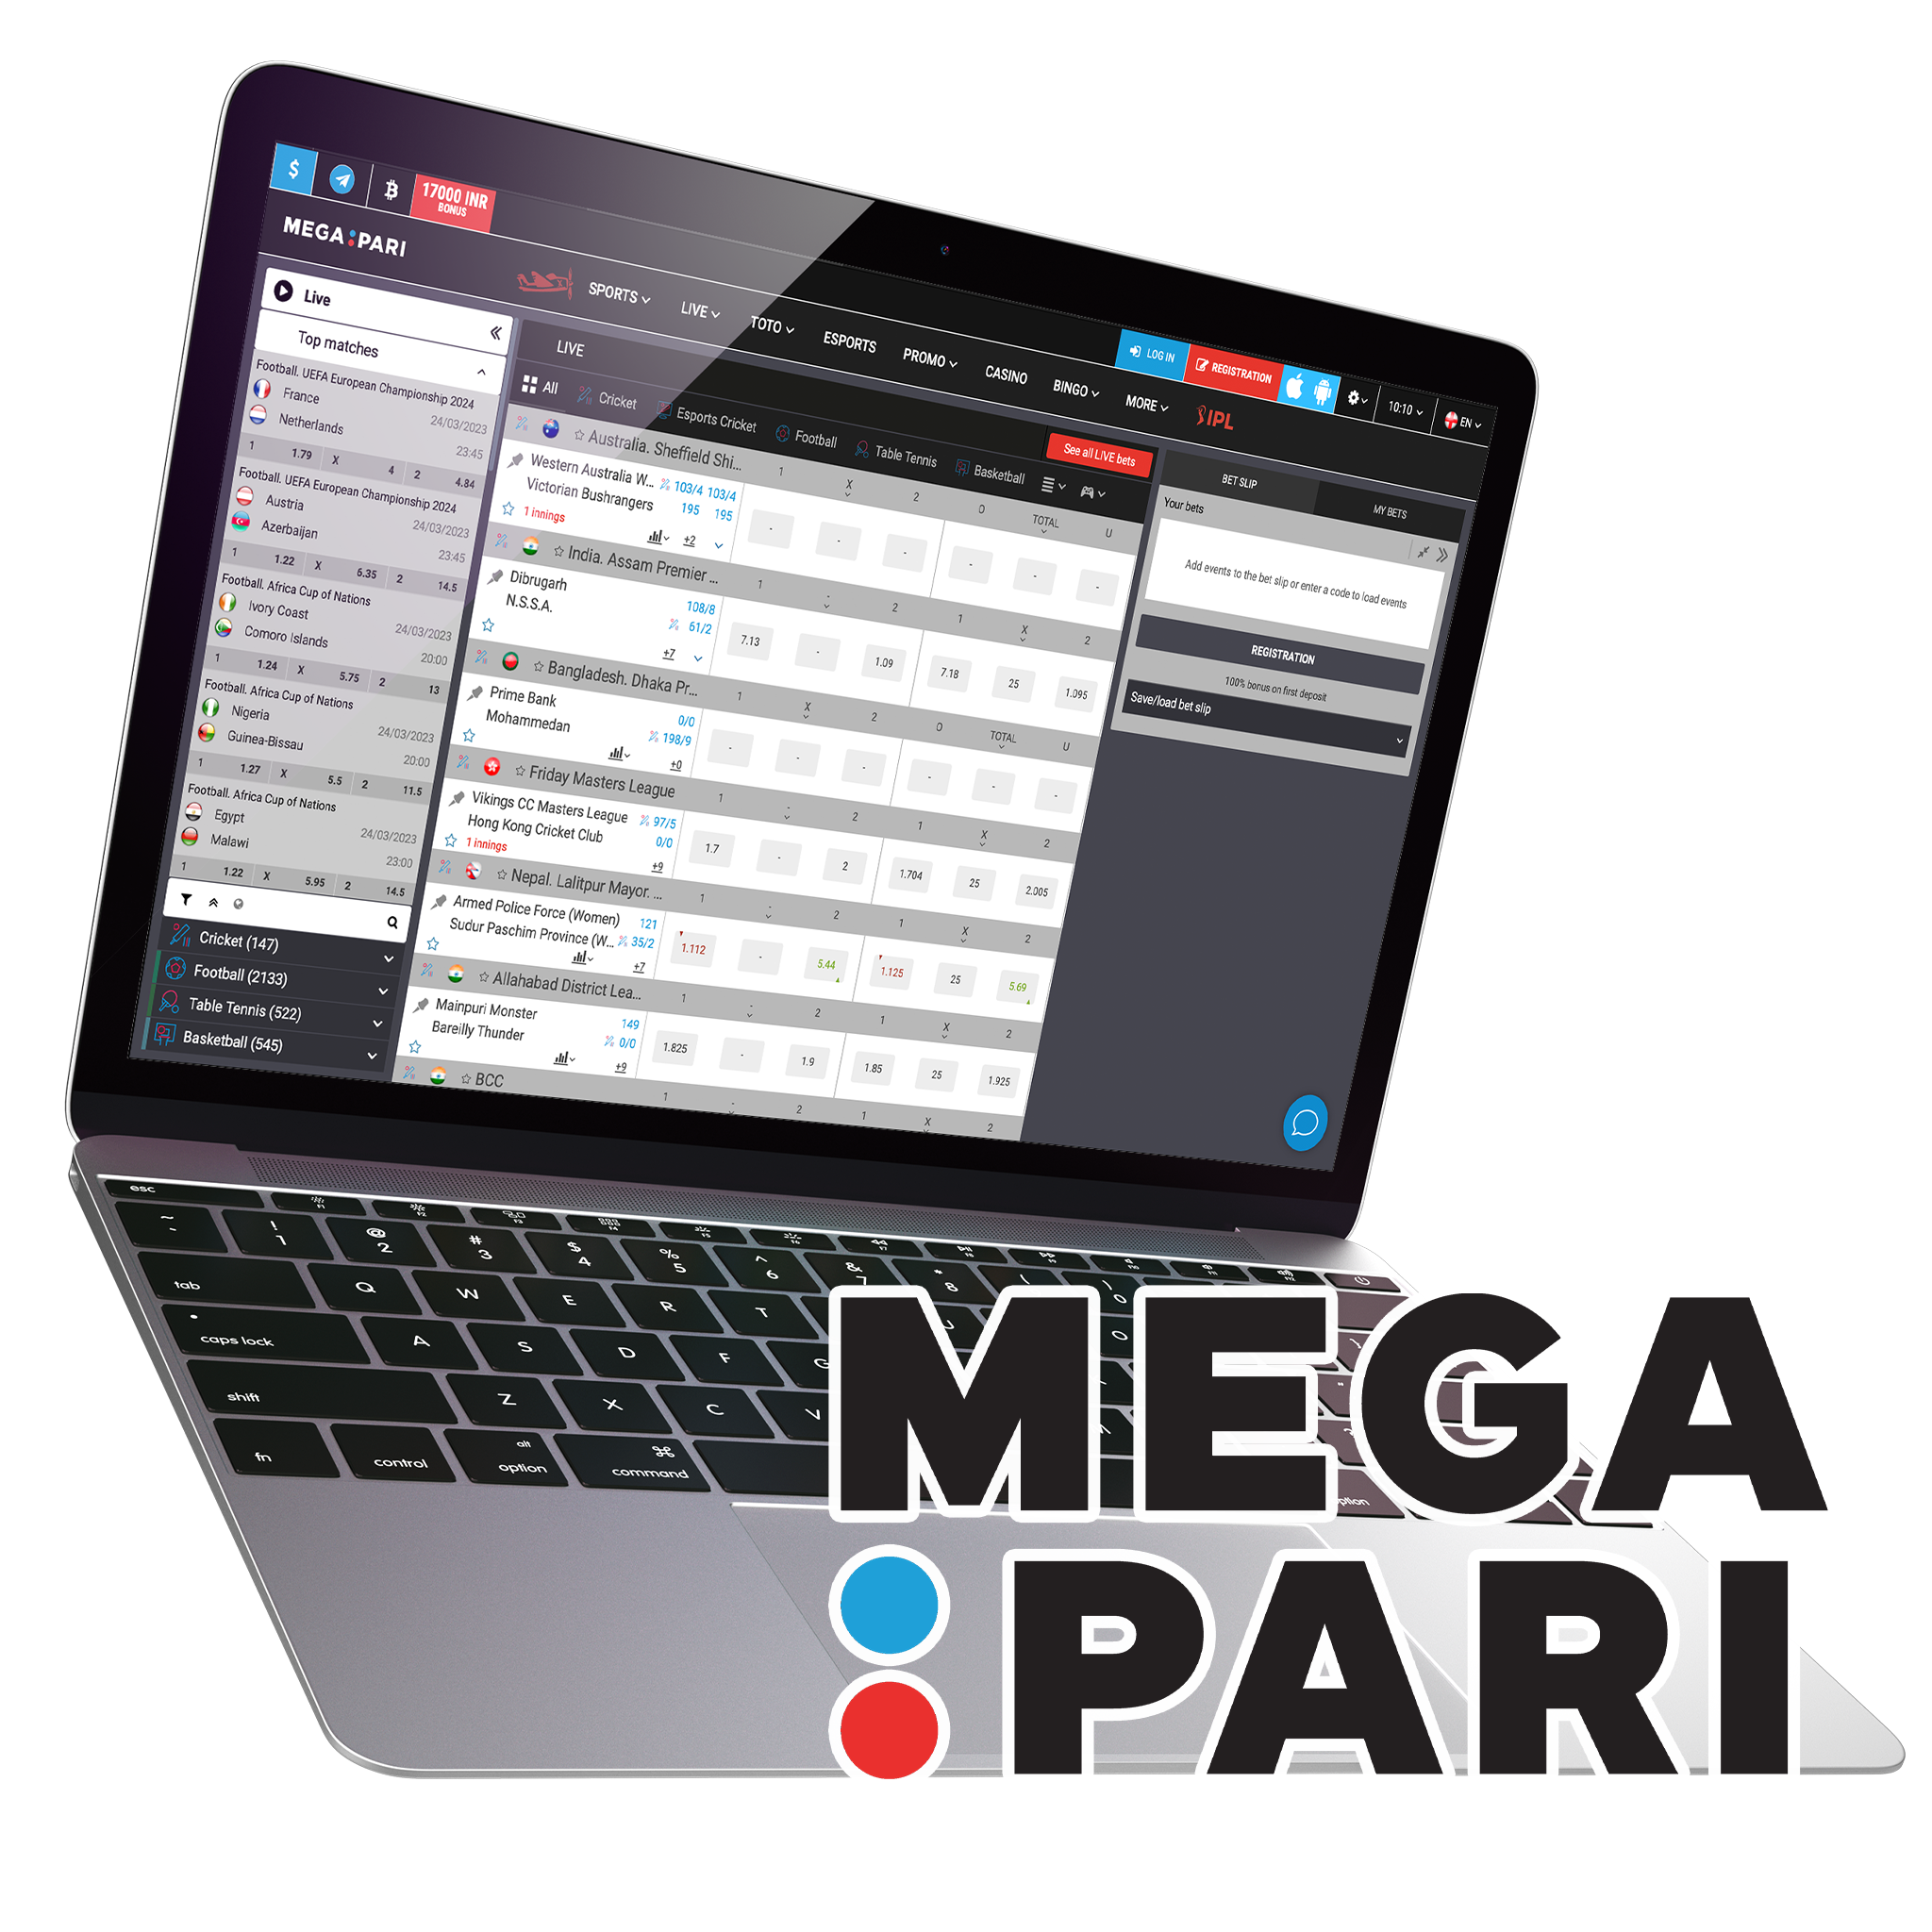 Megapari offers a wide range of sports betting and casino service.